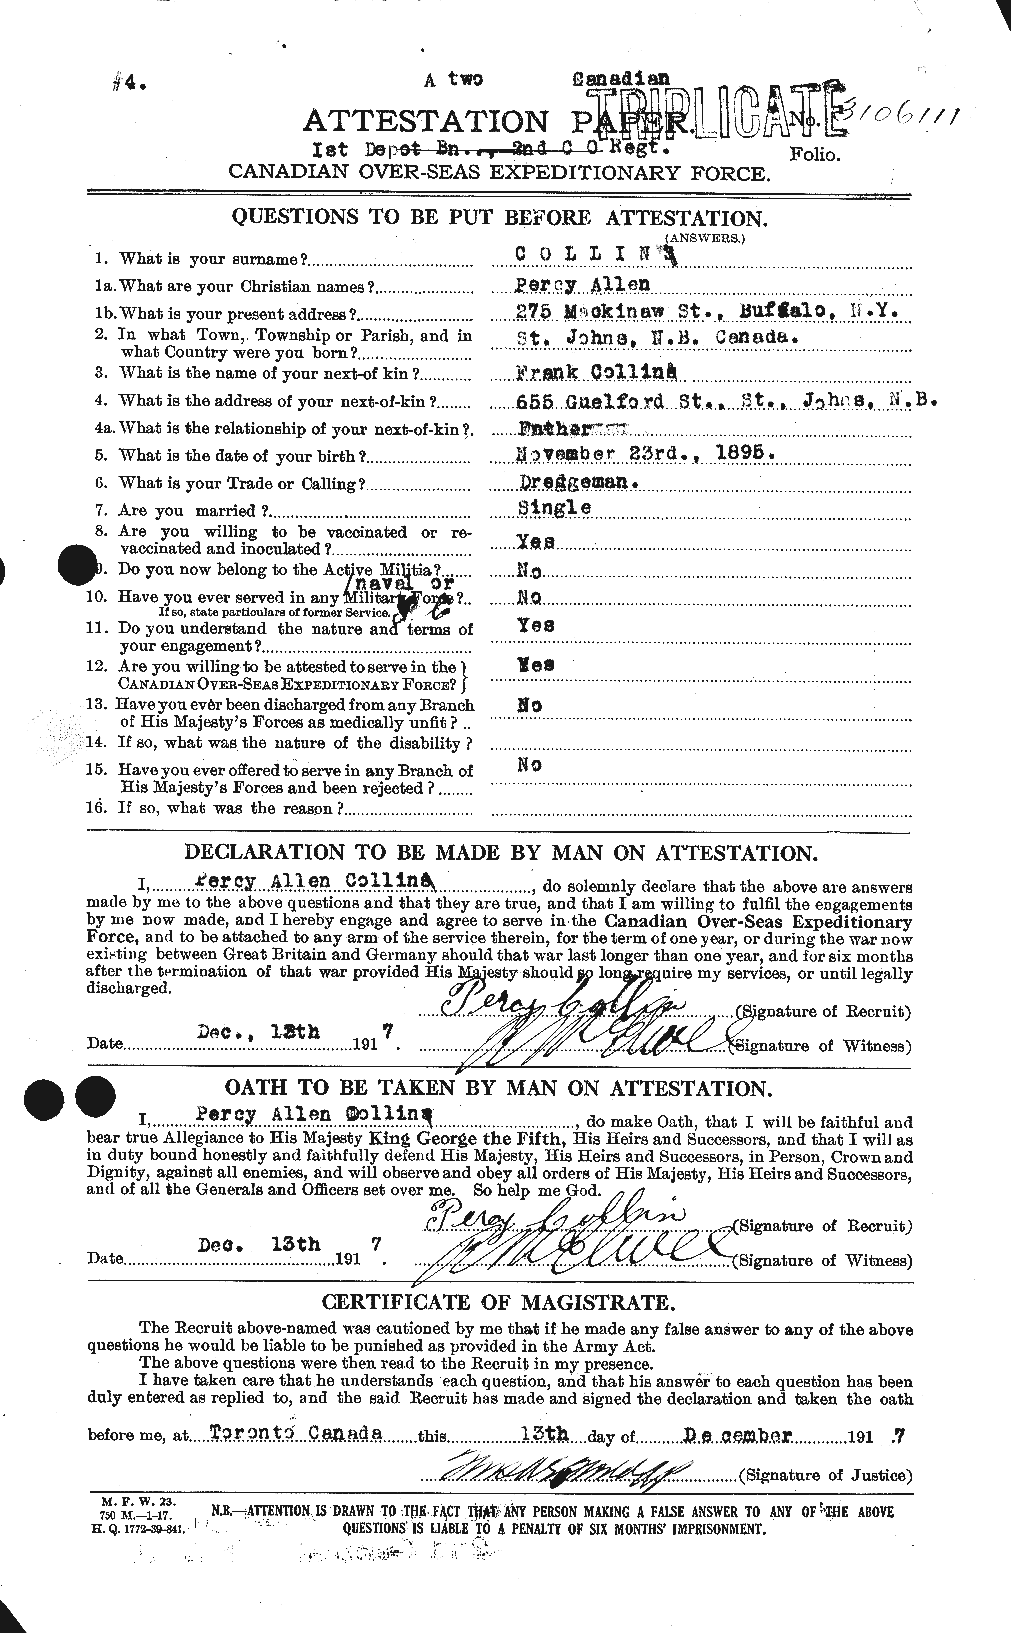 Personnel Records of the First World War - CEF 069297a